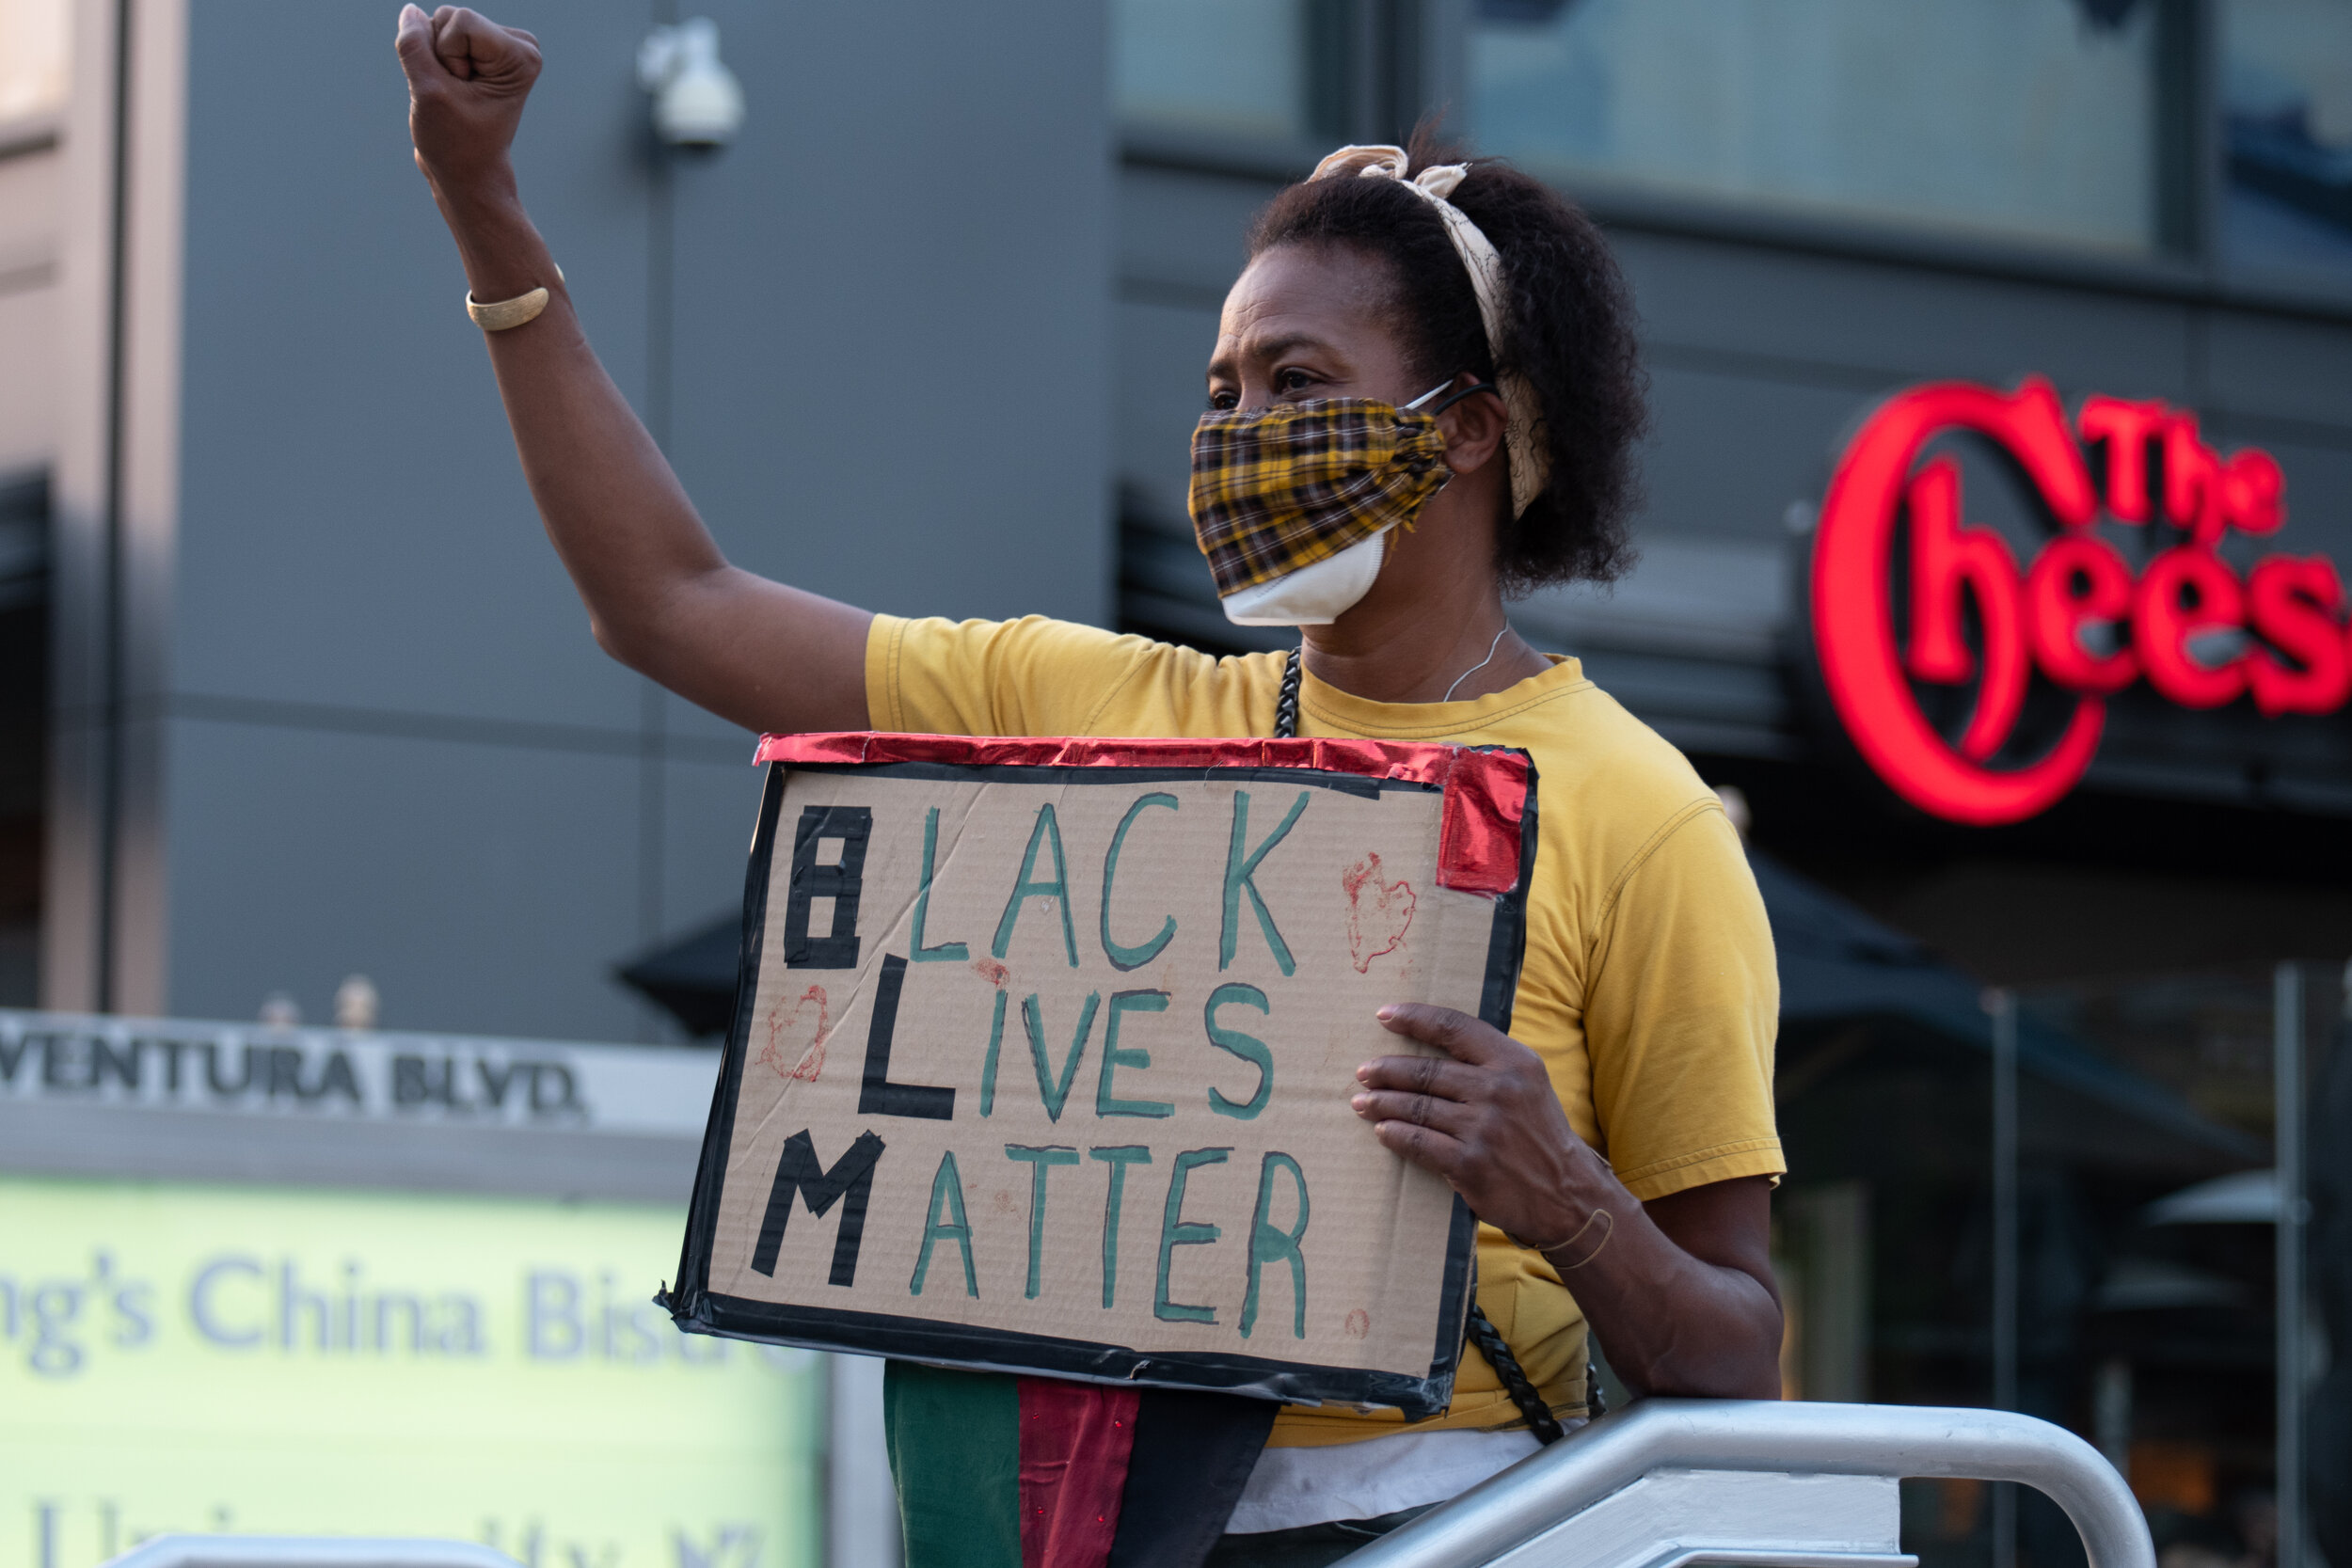   A protestor with The Valley of Change stands outside the Sherman Oaks Galleria at the northwest corner of Sepulveda Blvd and Ventura Blvd in Sherman Oaks, Calif. on Saturday, Sept. 26, 2020. (Michael Goldsmith / The Corsair)  